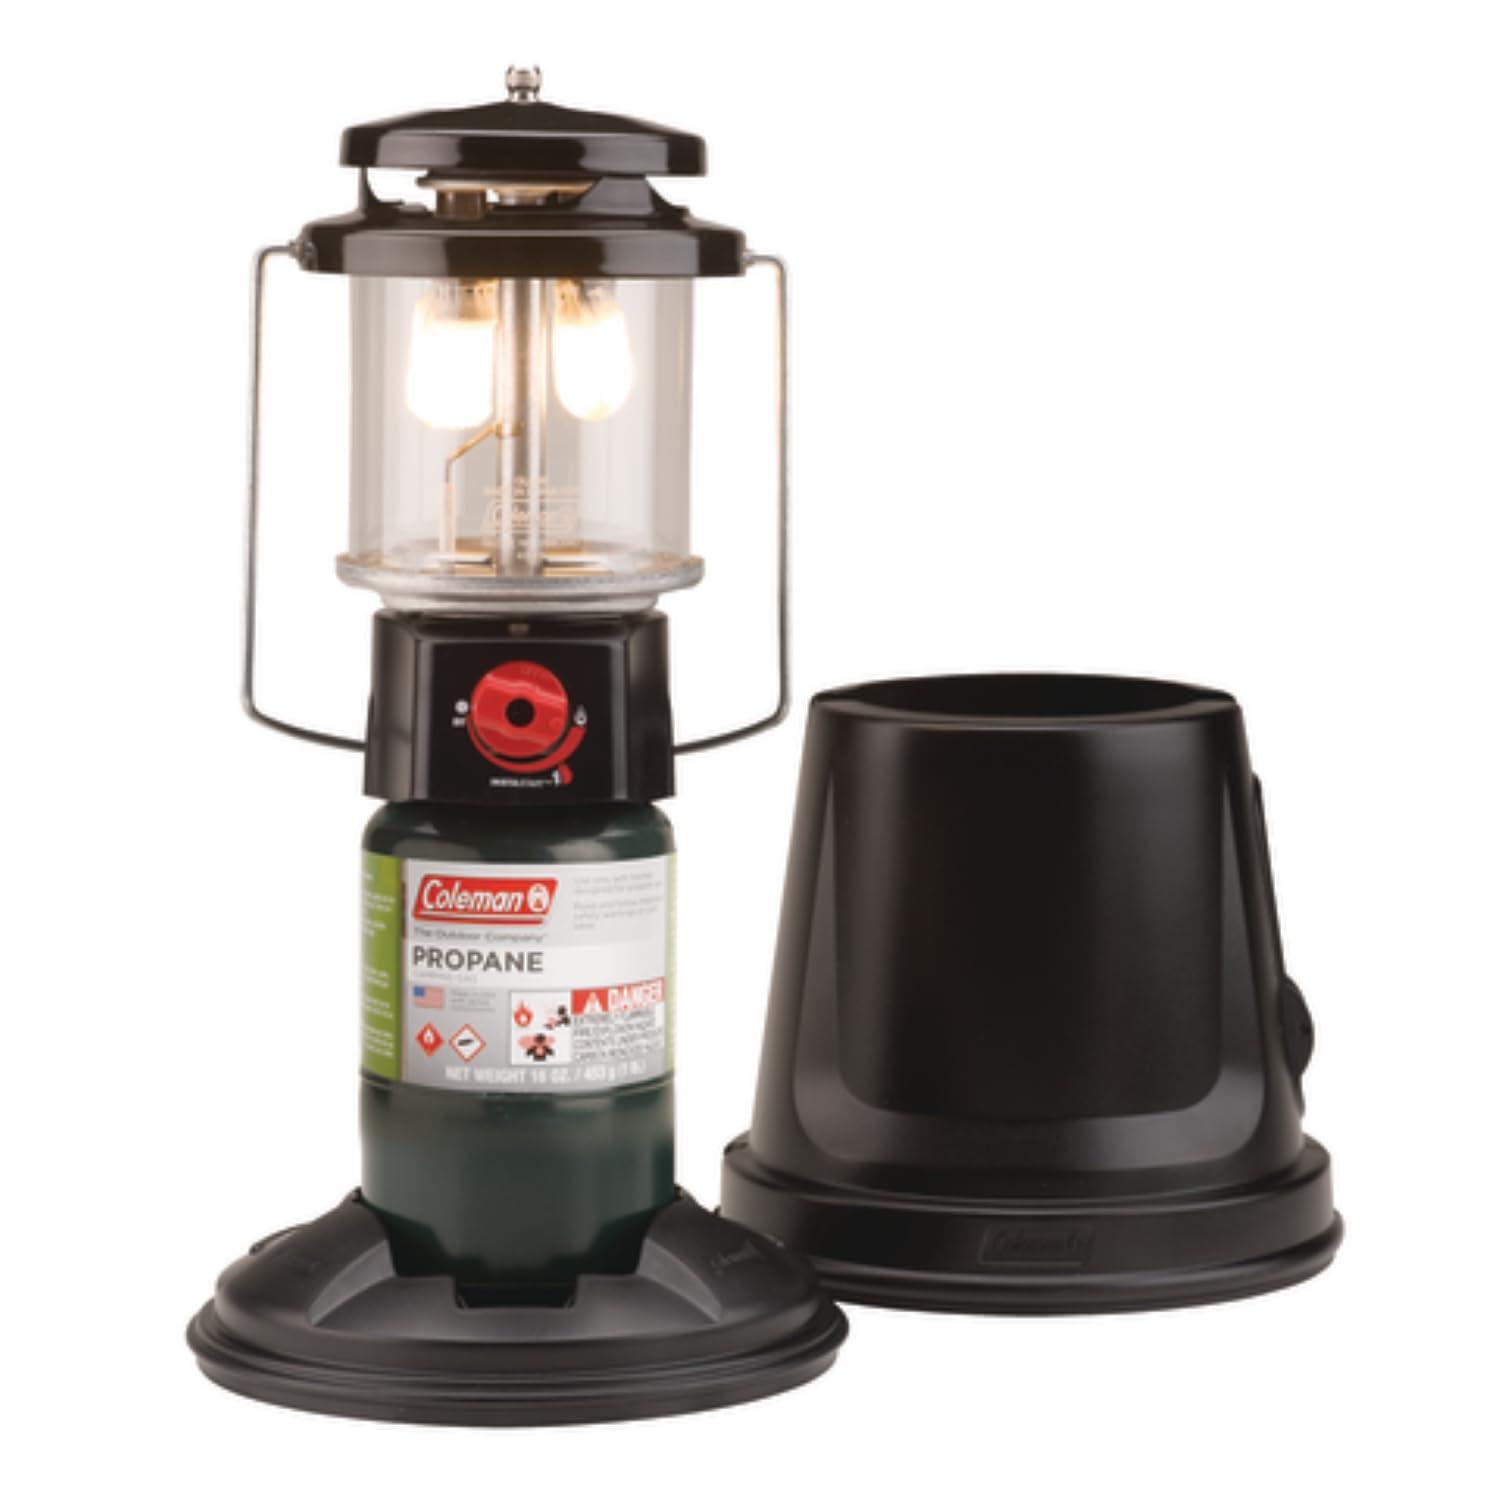 Coleman 1000 Lumens QuickPack Deluxe+ Propane Lantern w/ Automatic Ignition, Adjustable Brightness, & Carry Case $21.22 + F/S w/ Prime or $35+